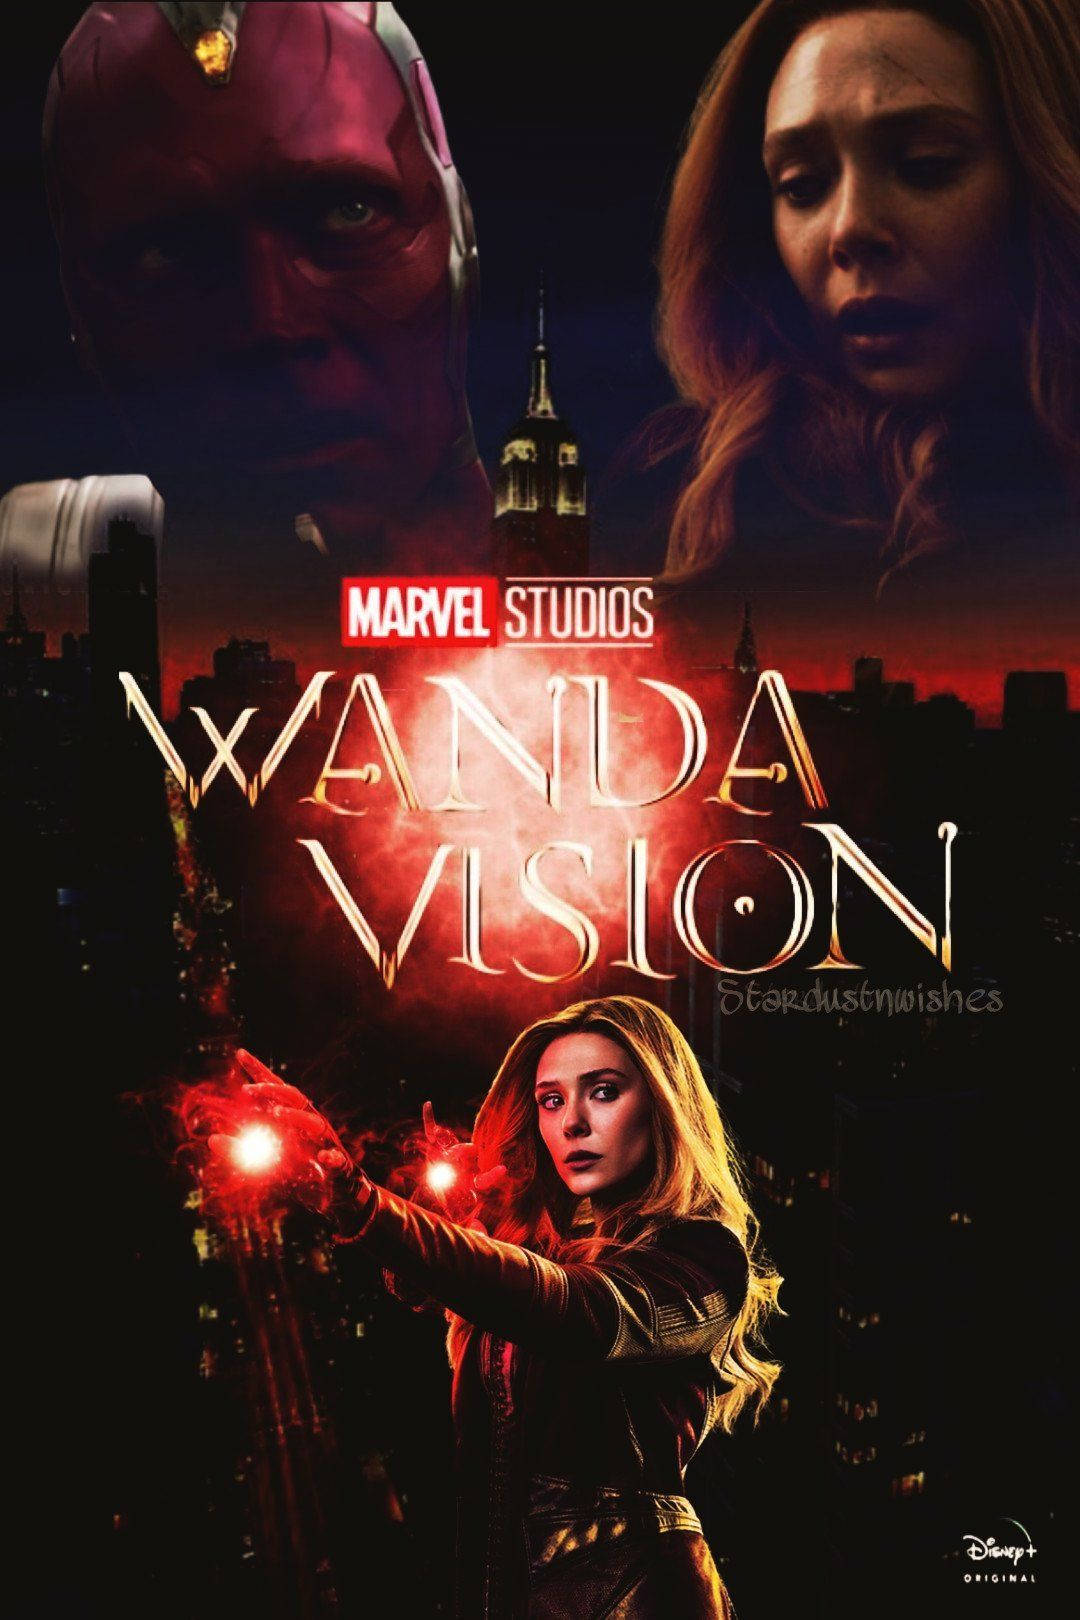 Wanda Maximoff And Vision Take Center Stage In This Fan-made Poster For Marvel's Wandavision.